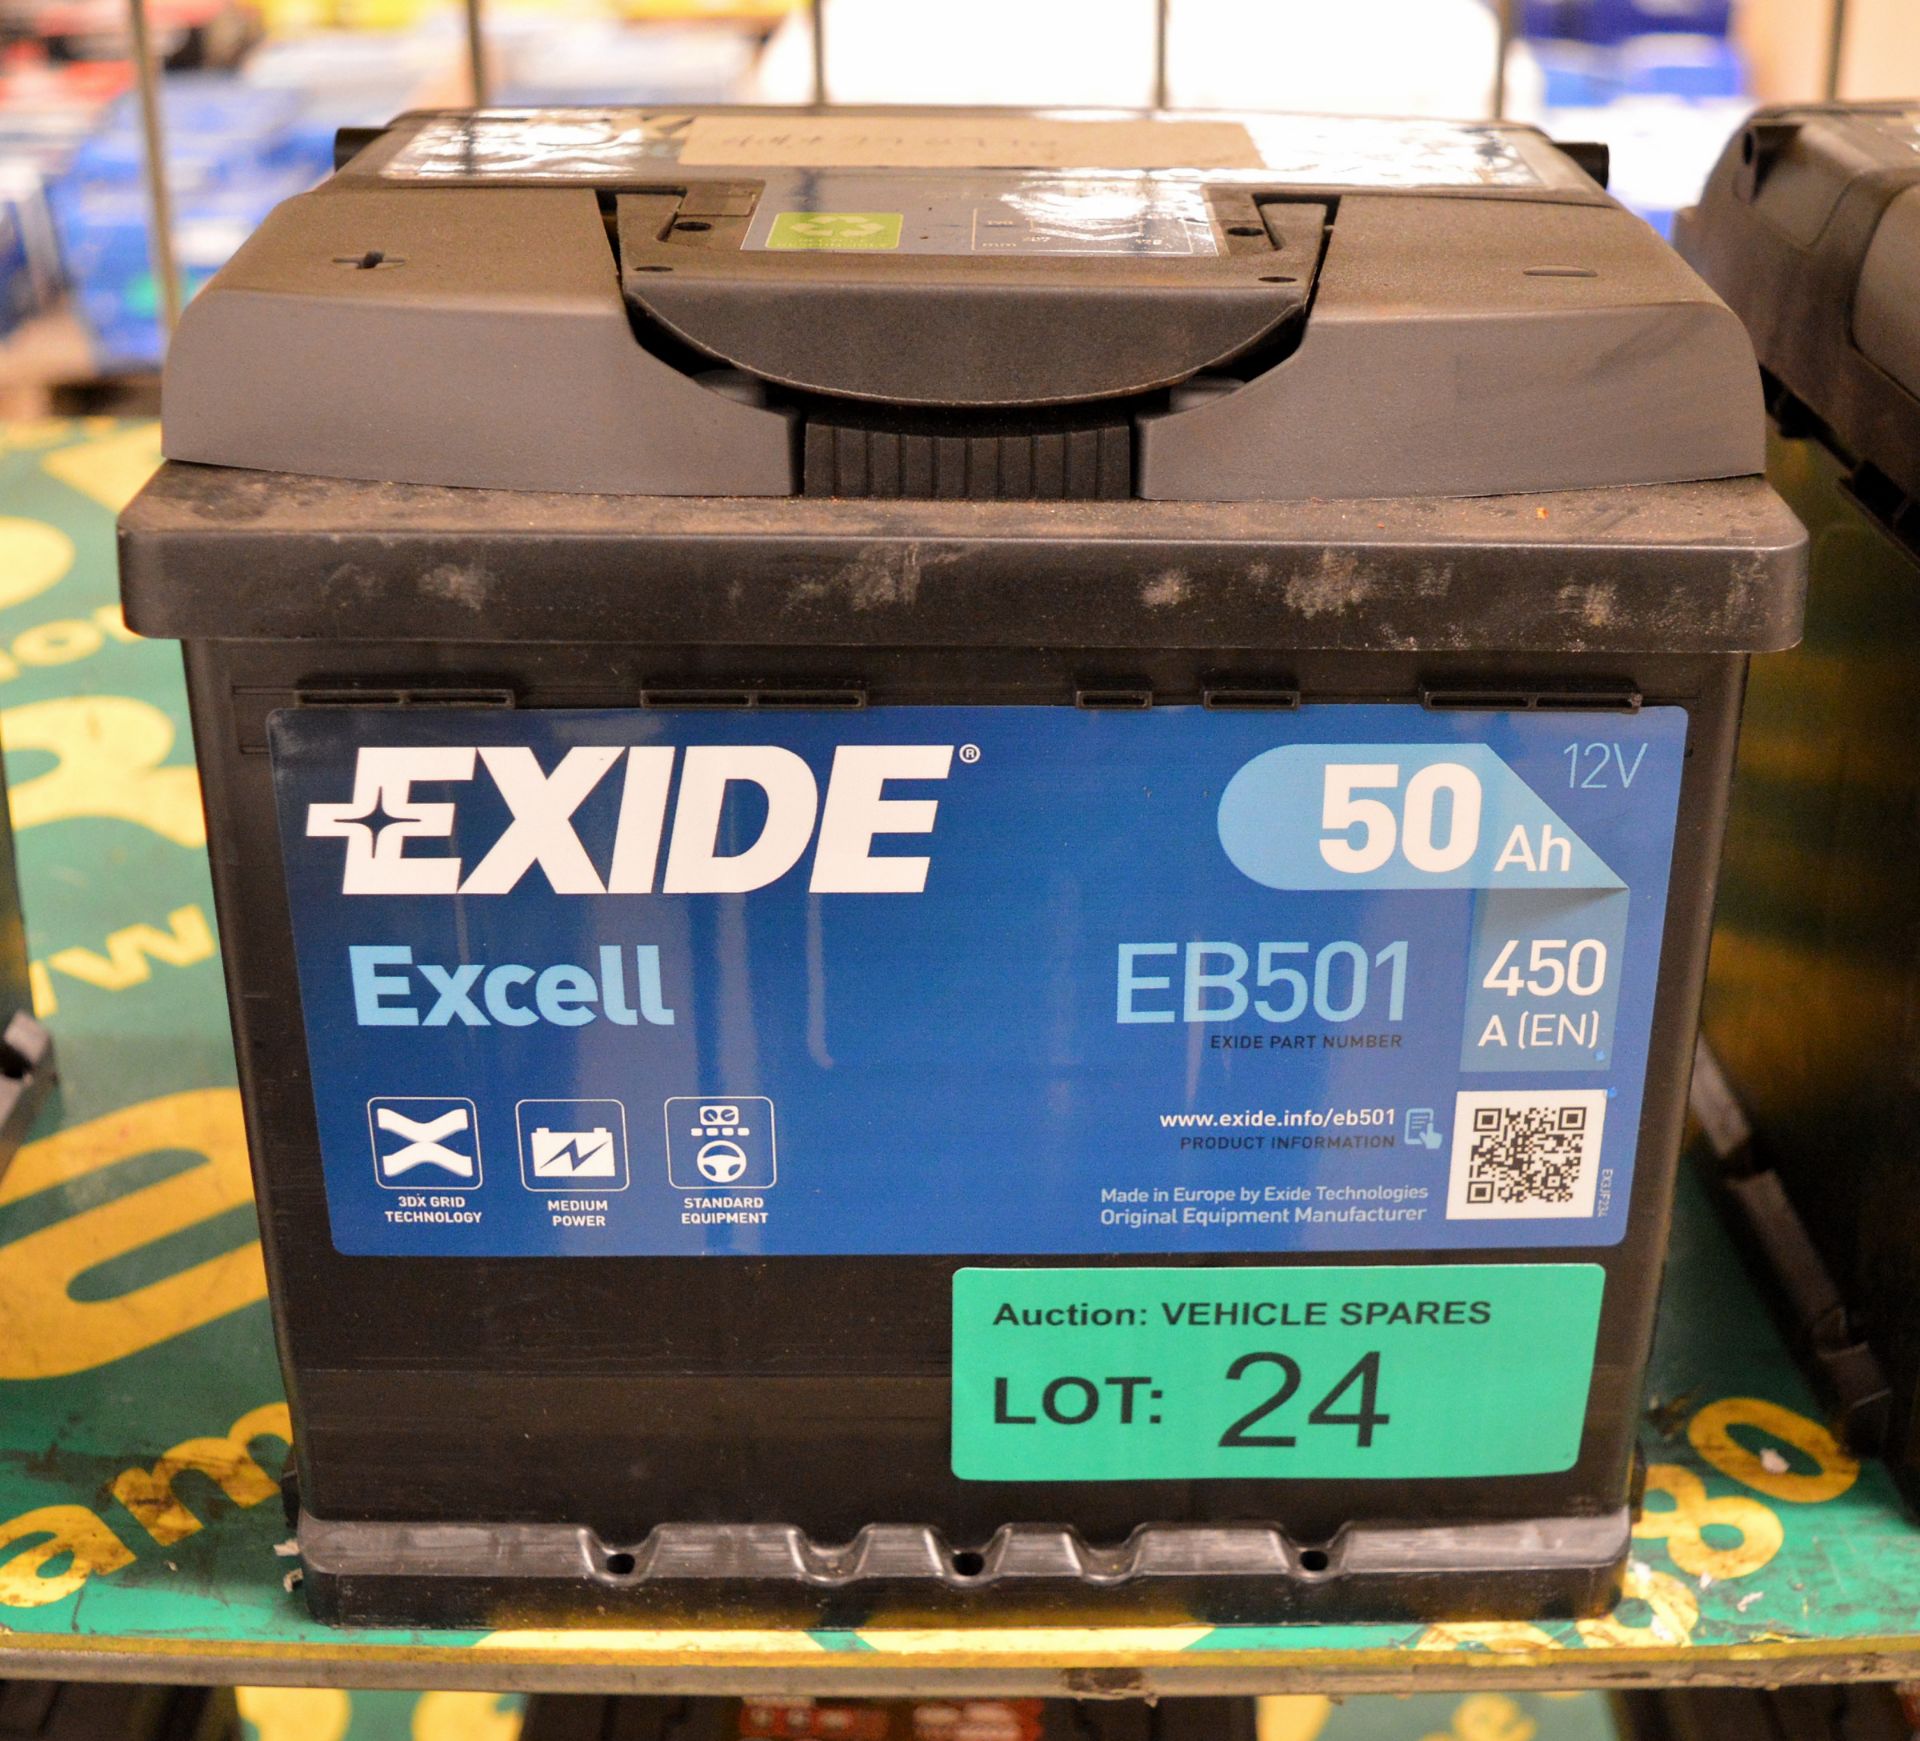 Exide Excell EB501 12V 50Ah 450A Battery